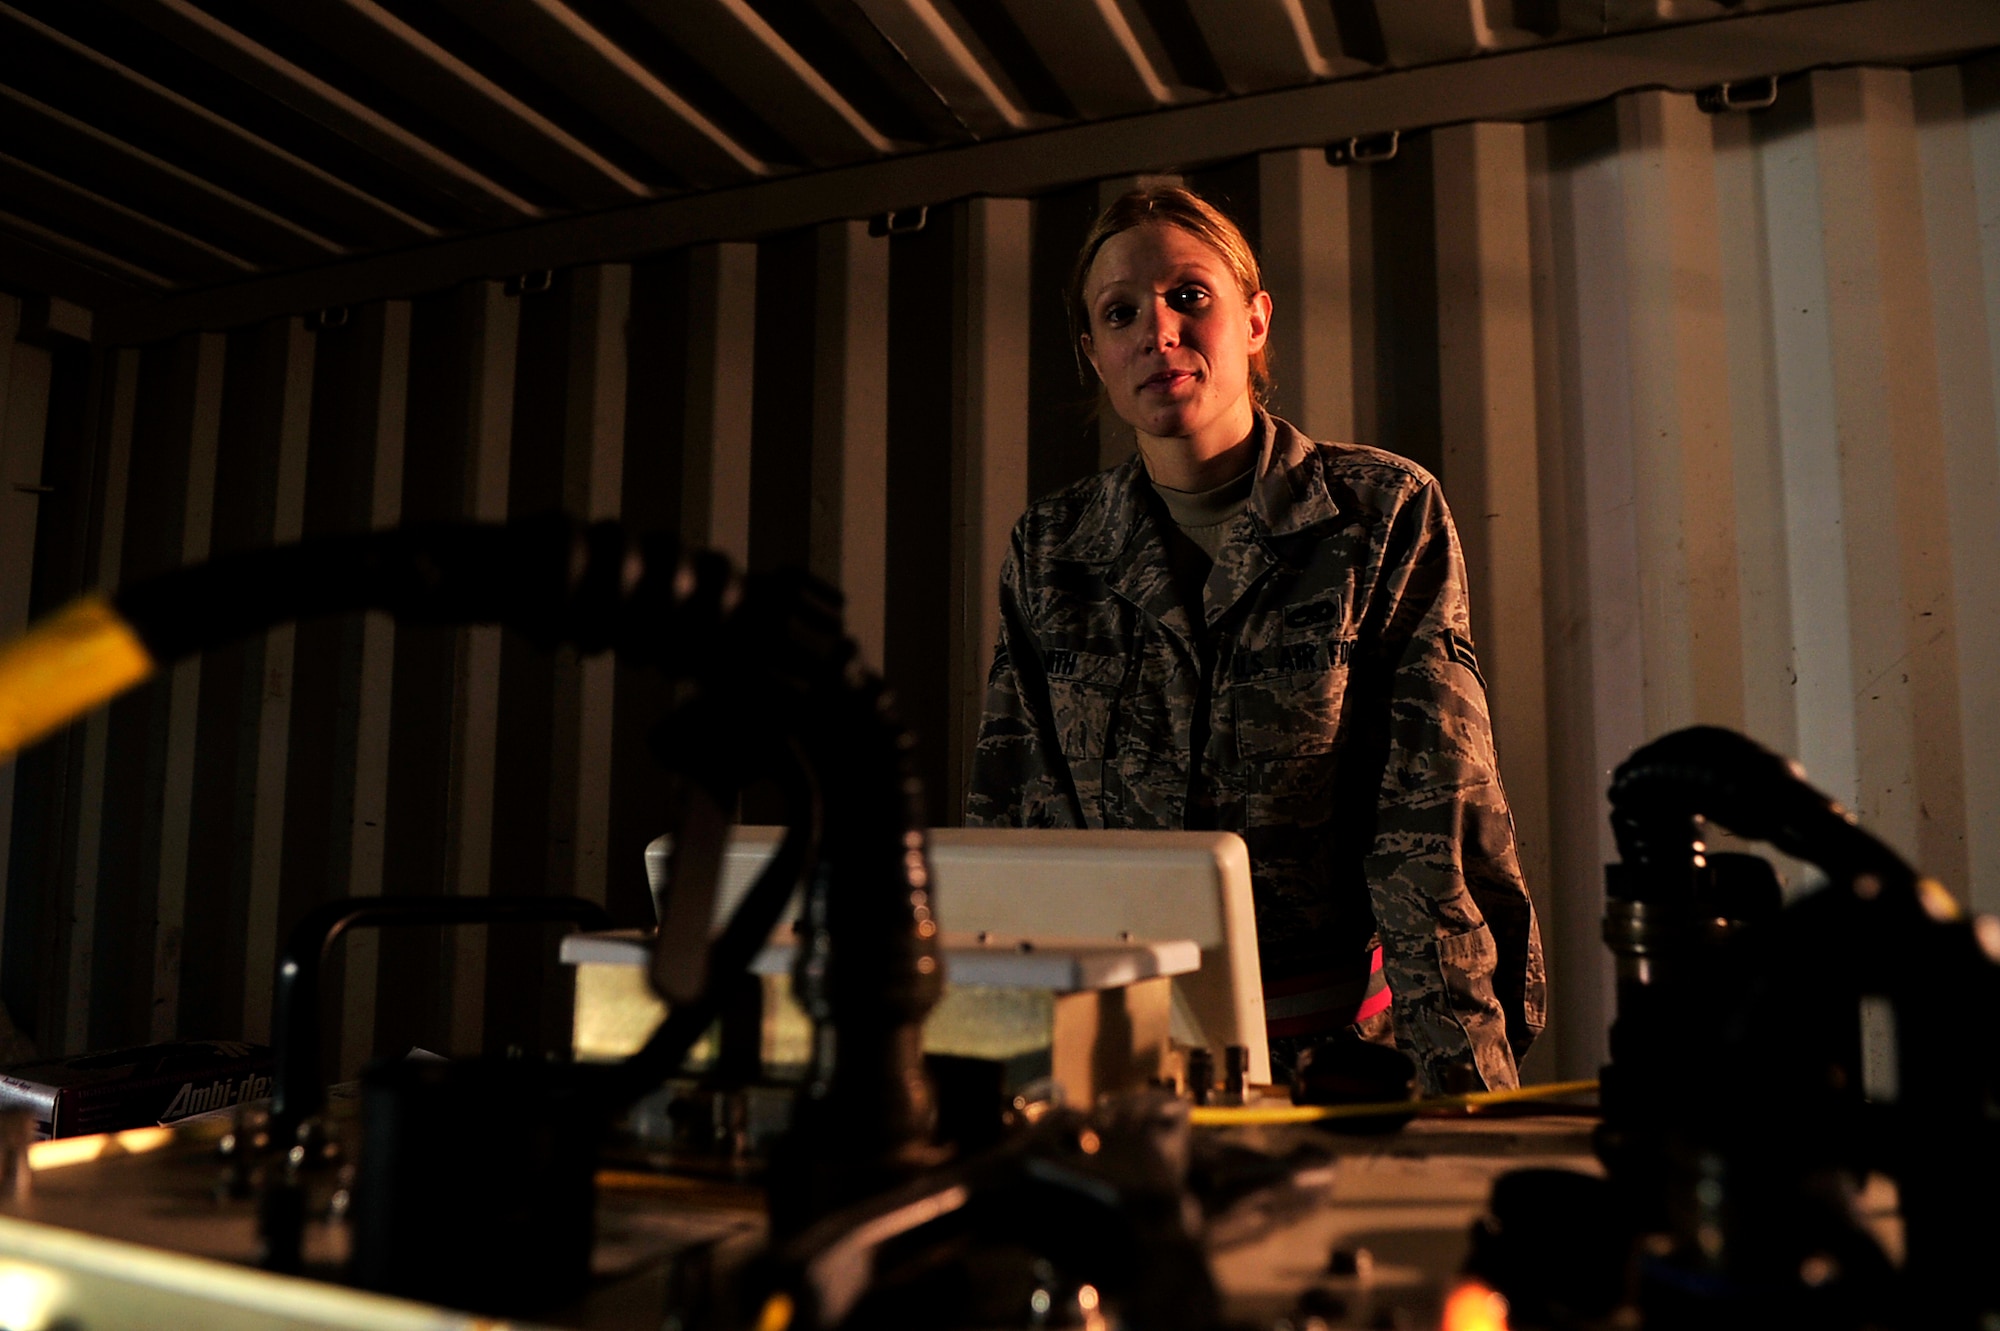 Airmen from the 18th Munitions Squadron build Mark 83 bomb bodies during Beverly High 10-02 at Kadena Air Base, Japan, March 24. The 18th Wing is participating in a Local Operational Readiness Exercise March 22-26 to test the readiness of Kadena Airmen. (U.S. Air Force photo/Senior Airman Amanda Grabiec)   